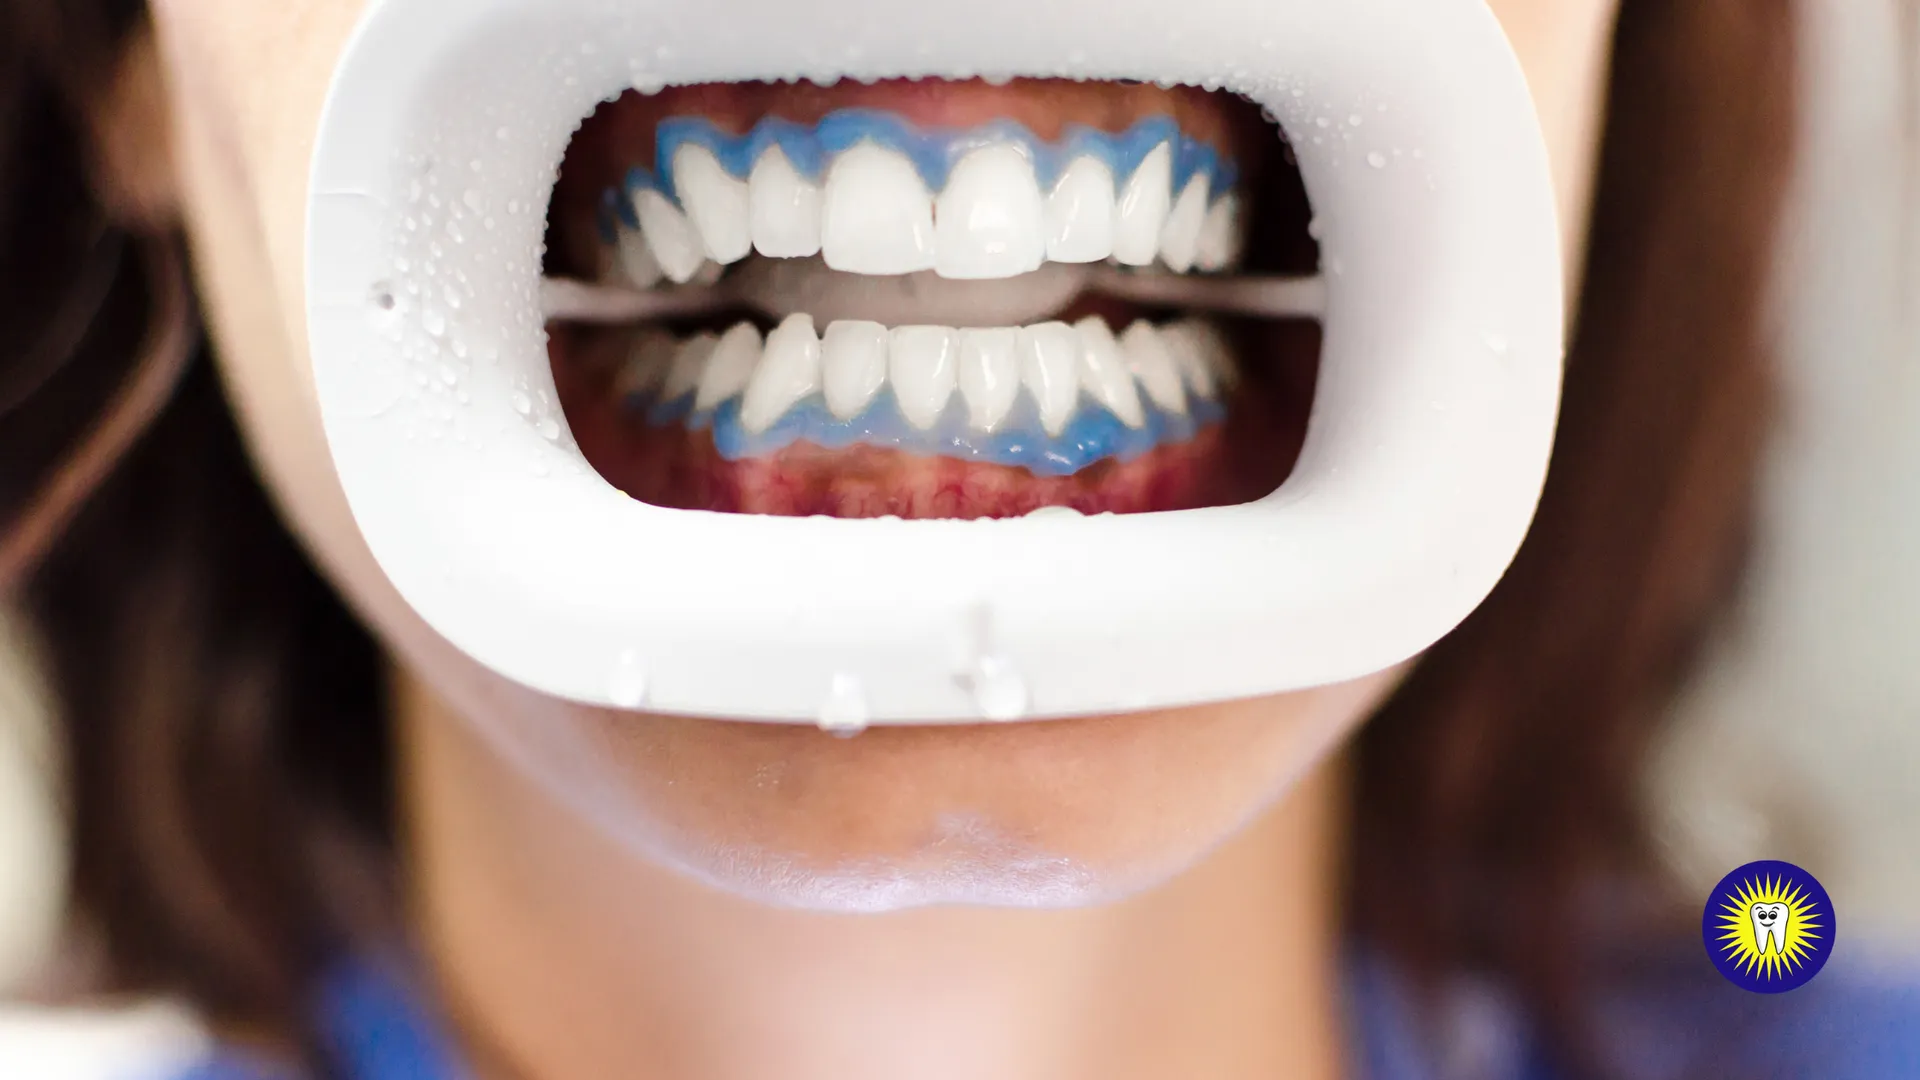 What to expect during a teeth whitening treatment